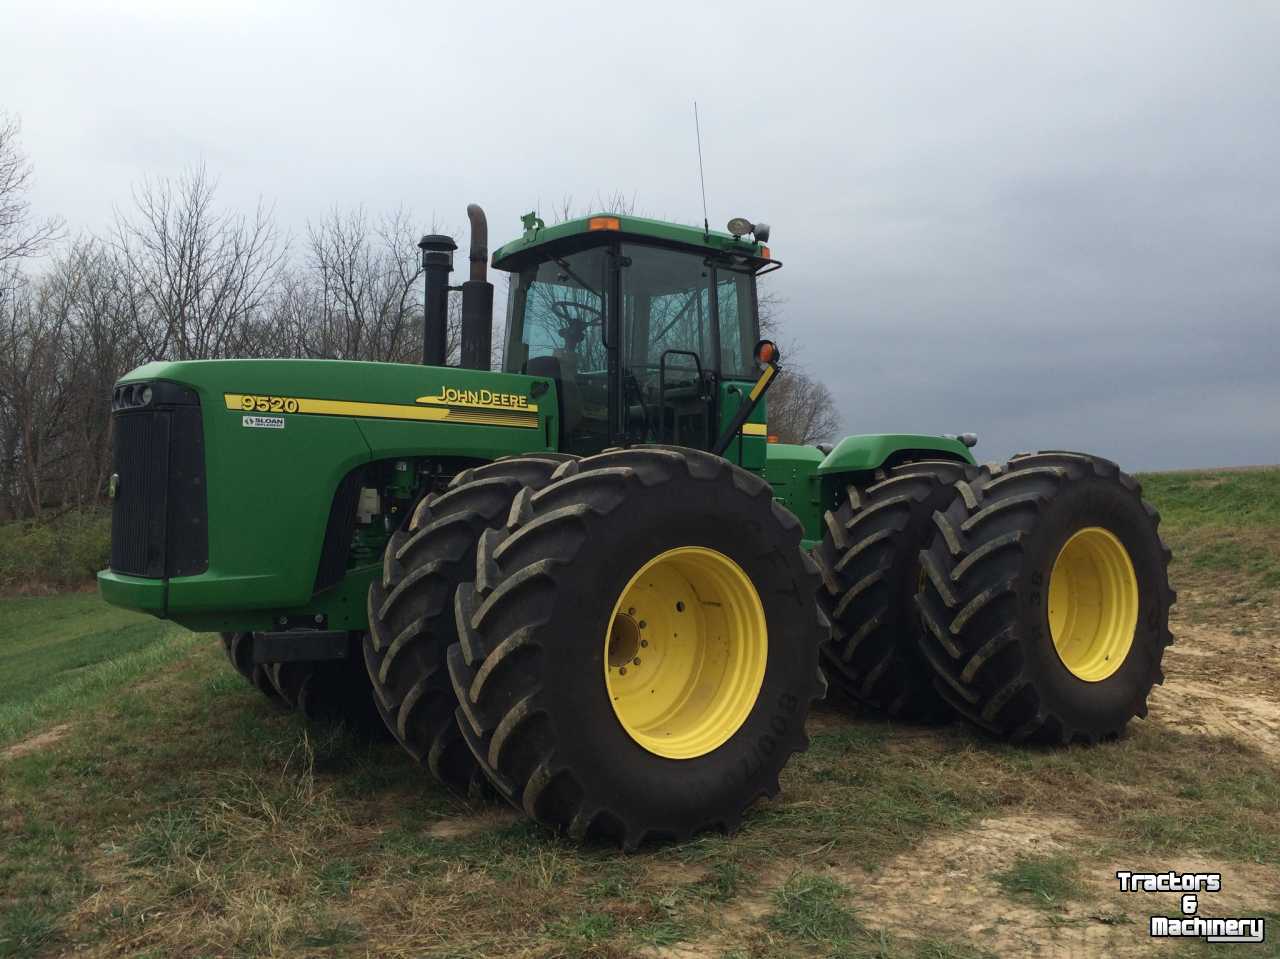 John Deere 9520 ARTICULATED 4WD TRACTORS USA - Used Tractors - 2002 ...